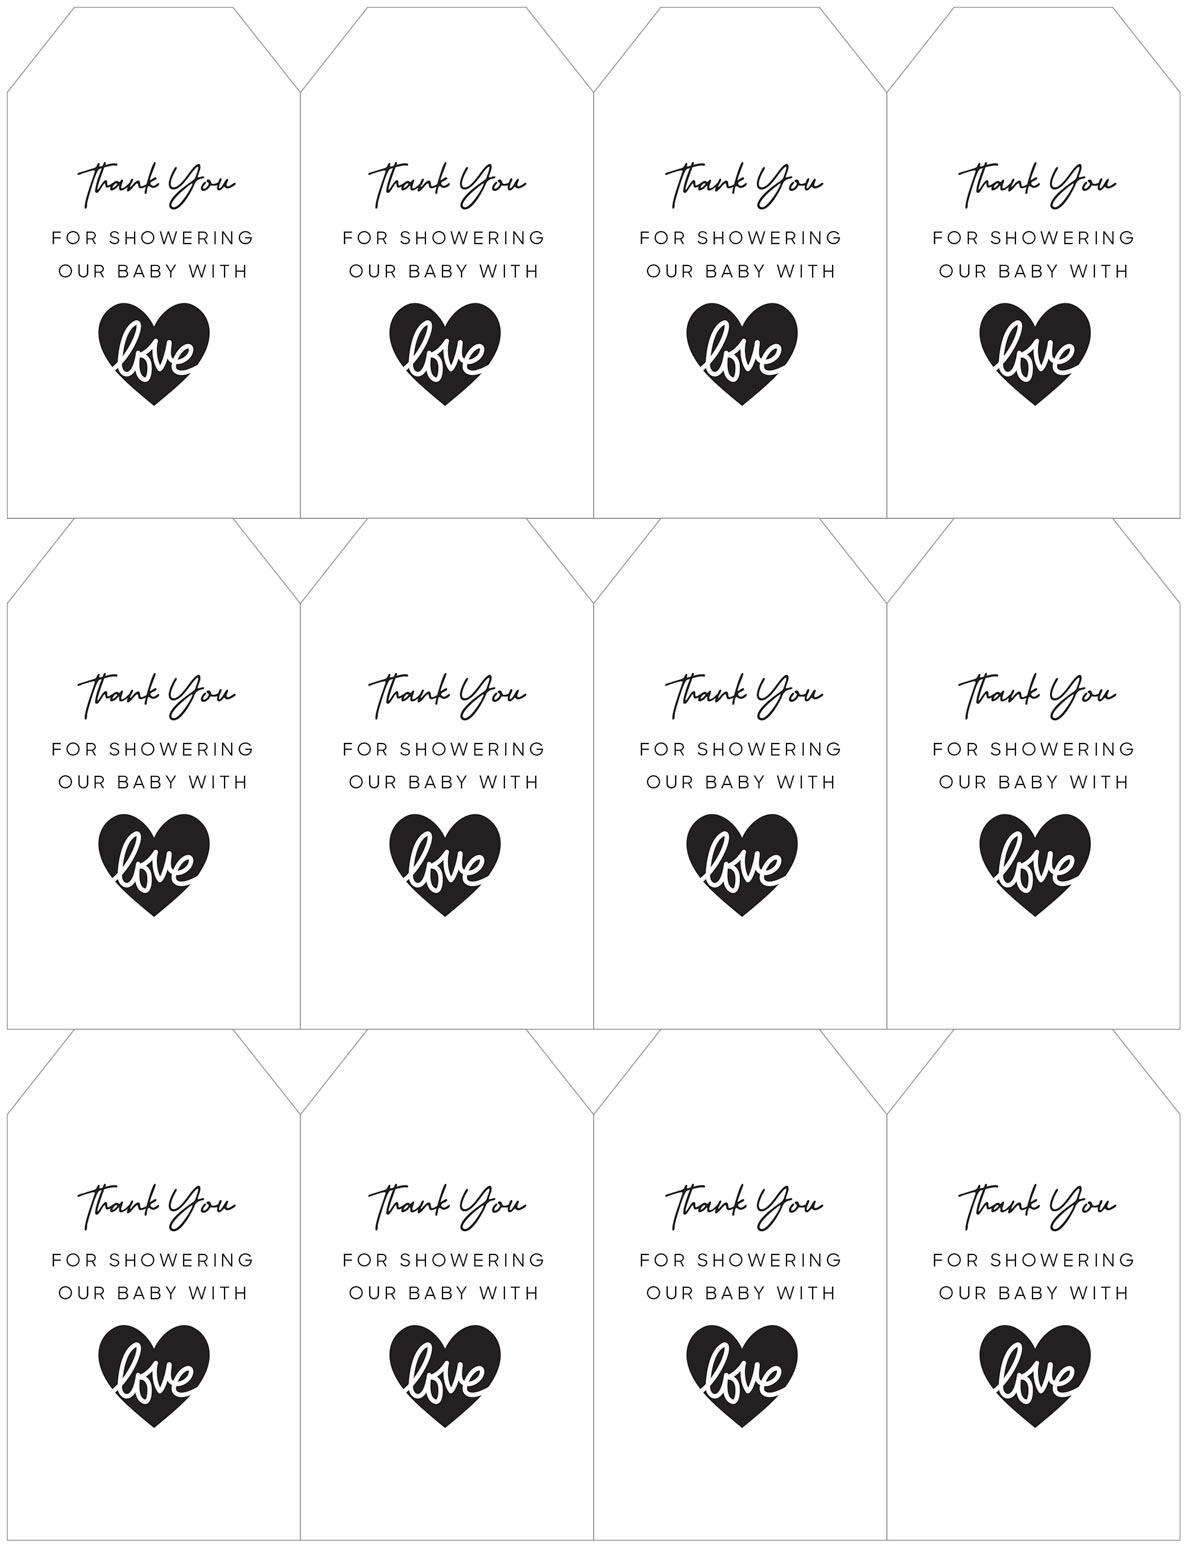 Charming Baby Shower Favor Tags: Free Printable For Your Thank You pertaining to Free Printable Baby Shower Gift Tags